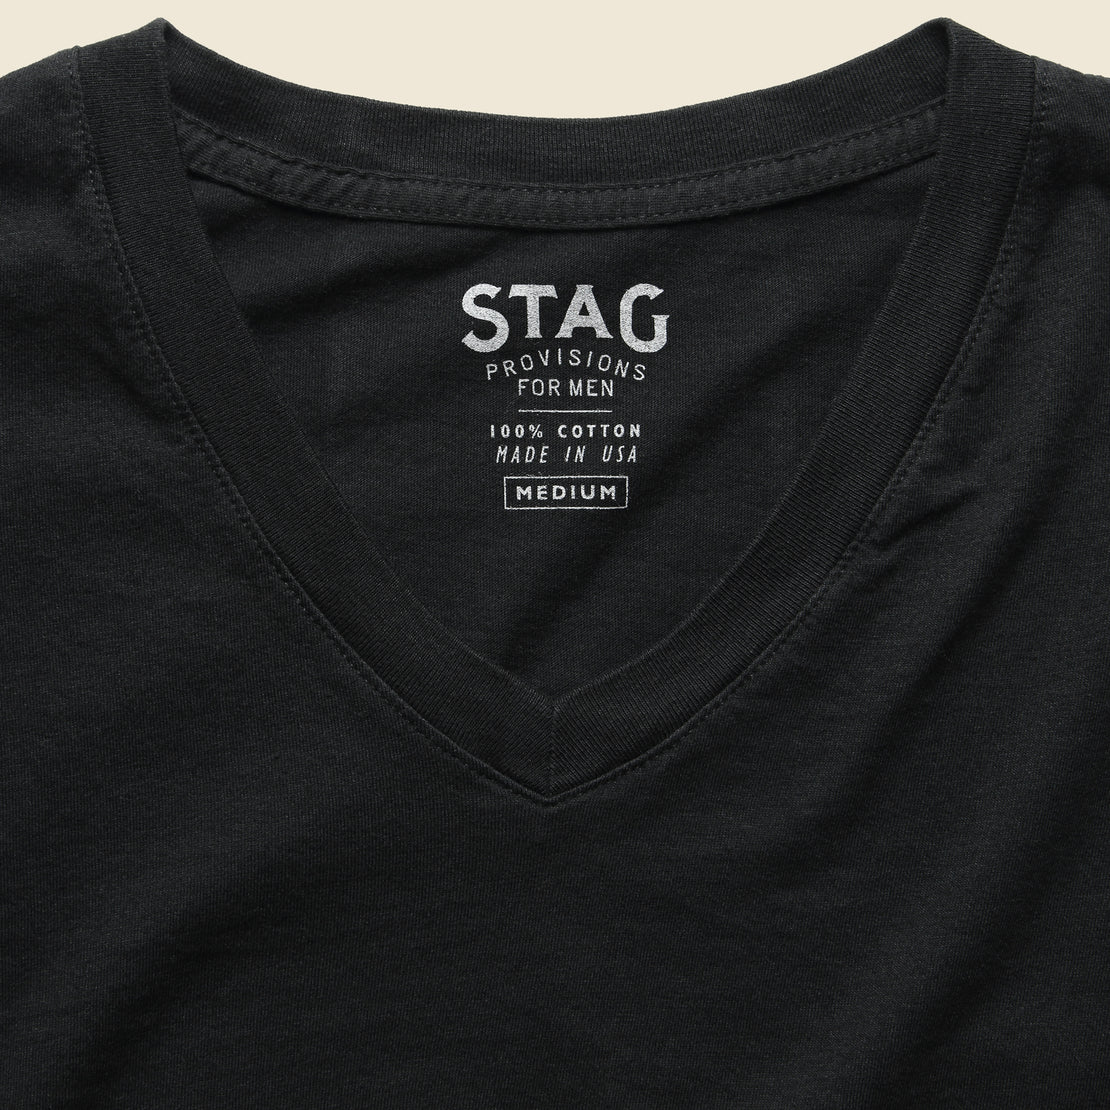 V-Neck Tee - Black - STAG - STAG Provisions - Tops - S/S Tee